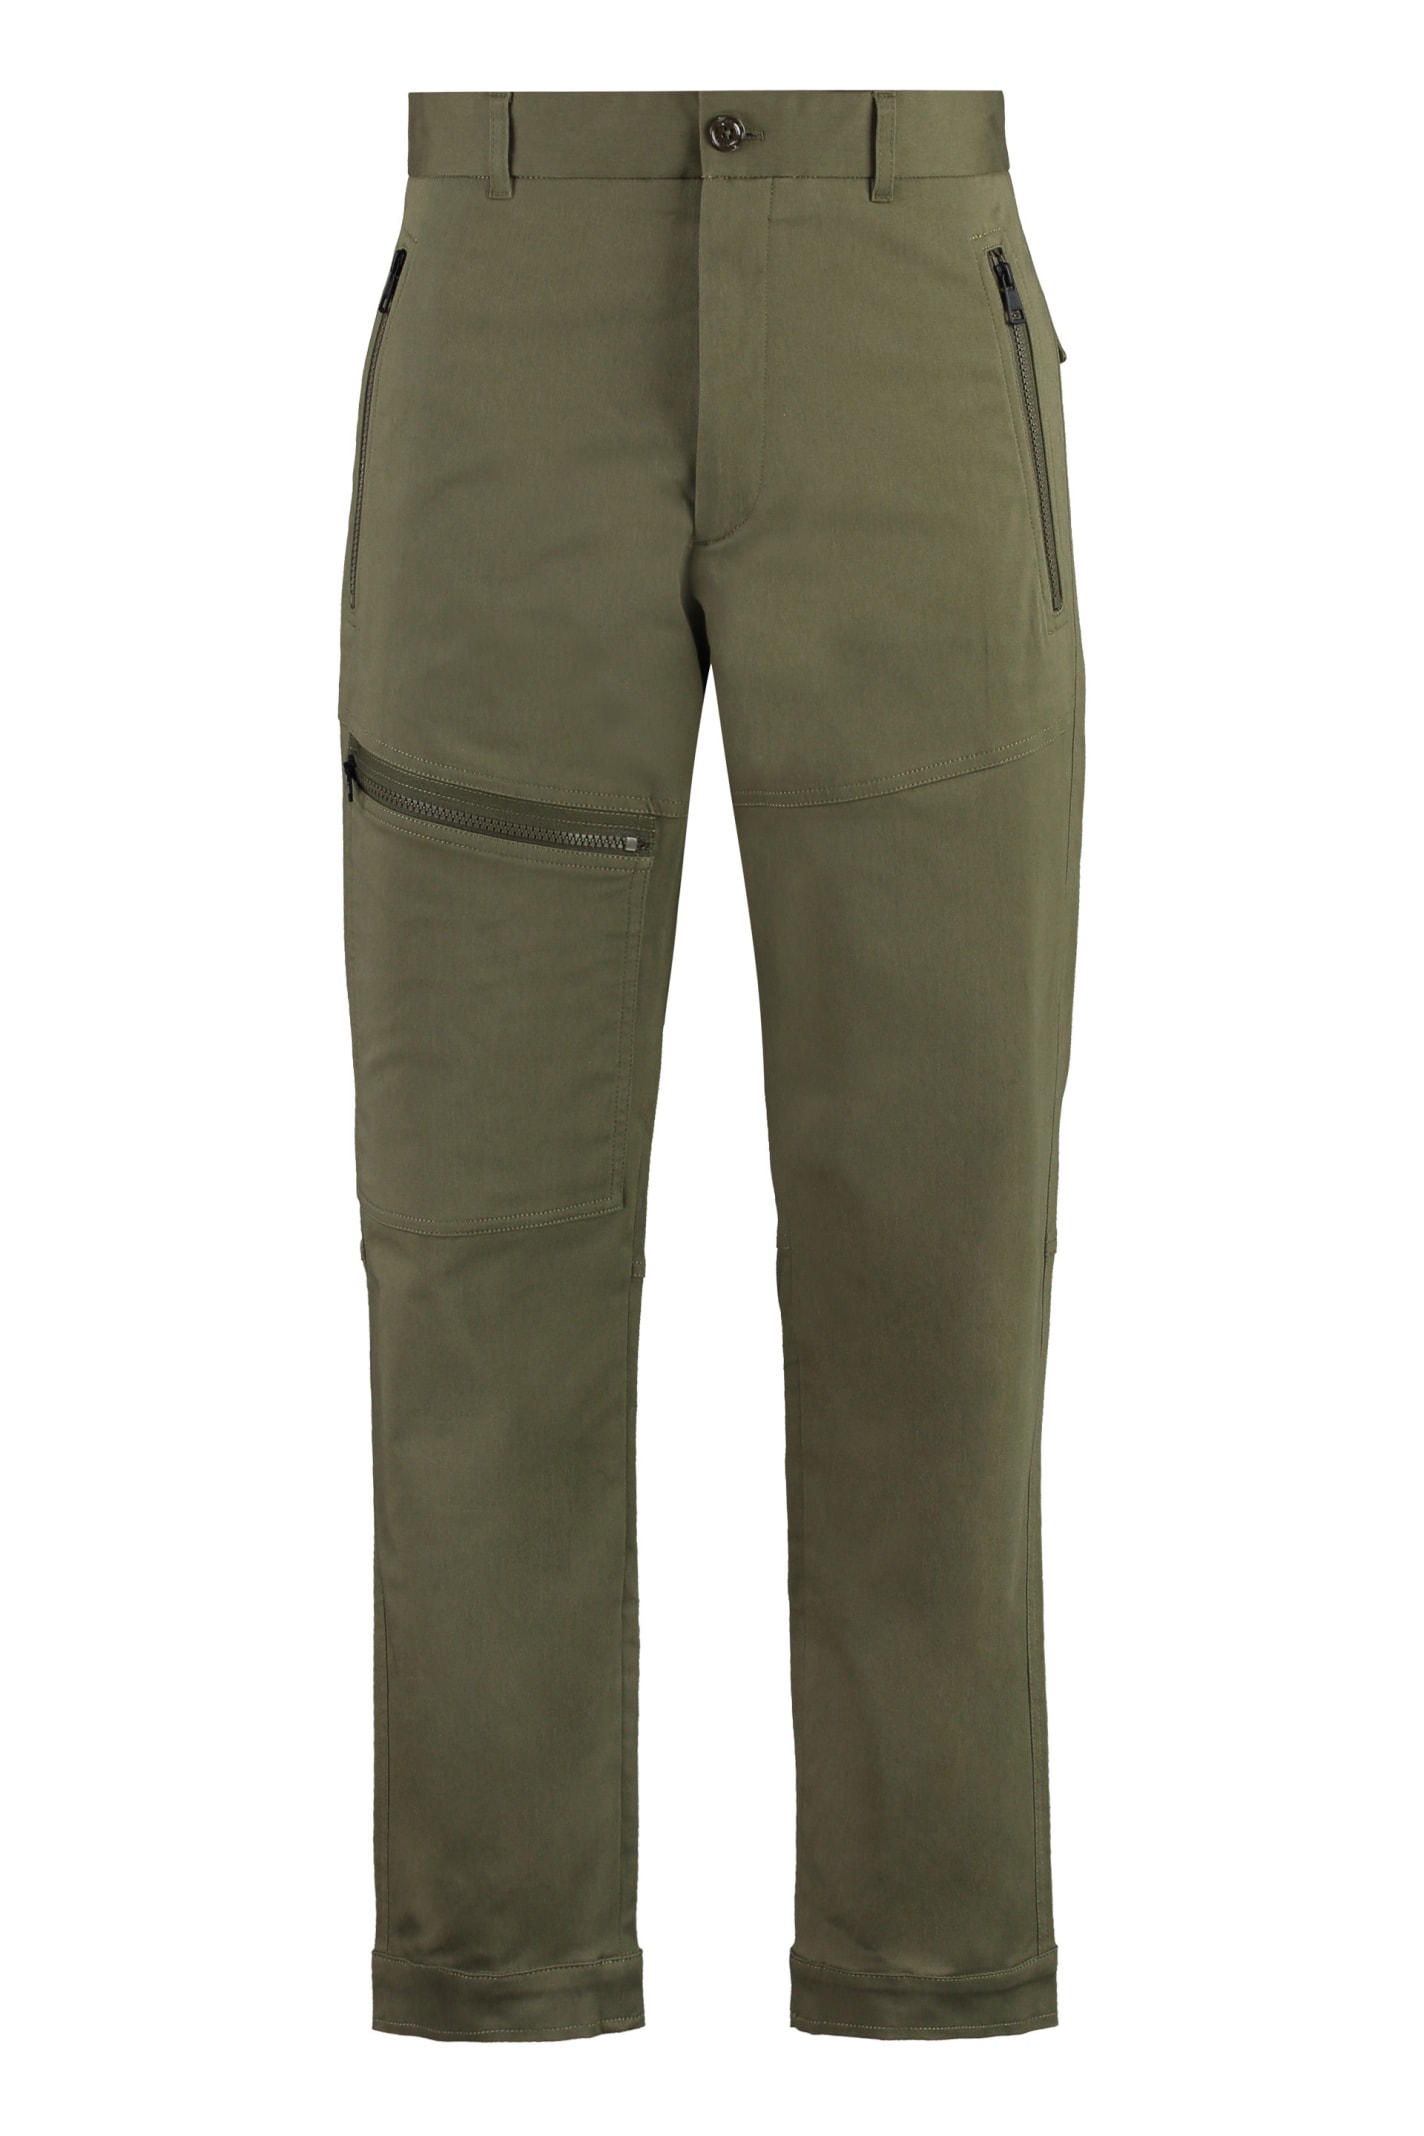 Buy Peter England Olive Green Cotton Skinny Fit Trousers for Mens Online @  Tata CLiQ